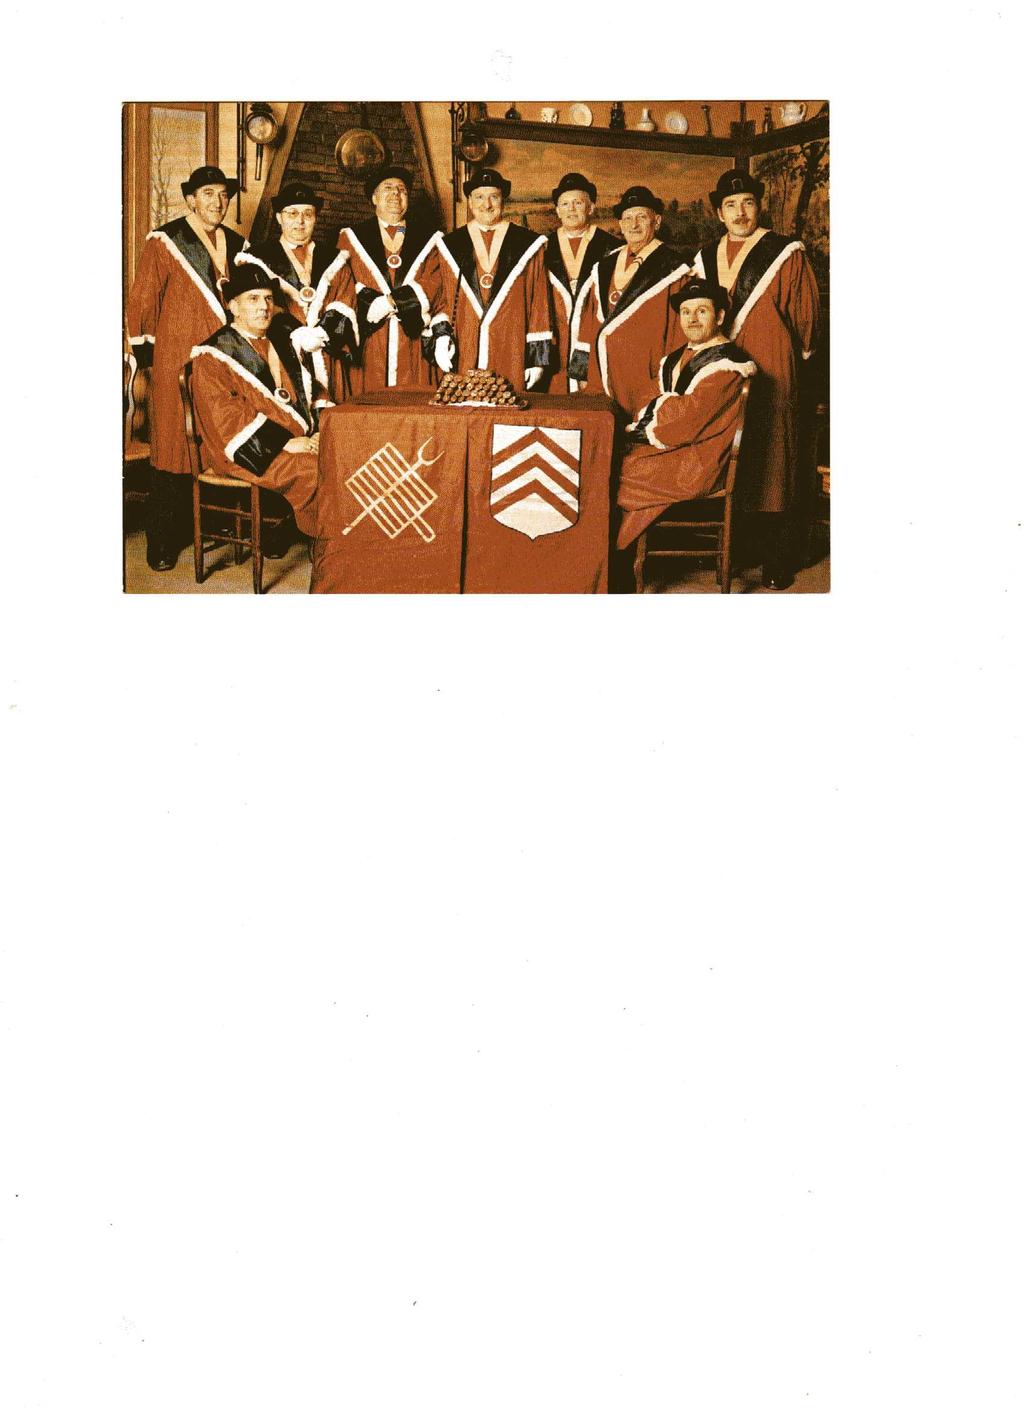 Dignitaries of the Black Pudding Fraternity, 1969.